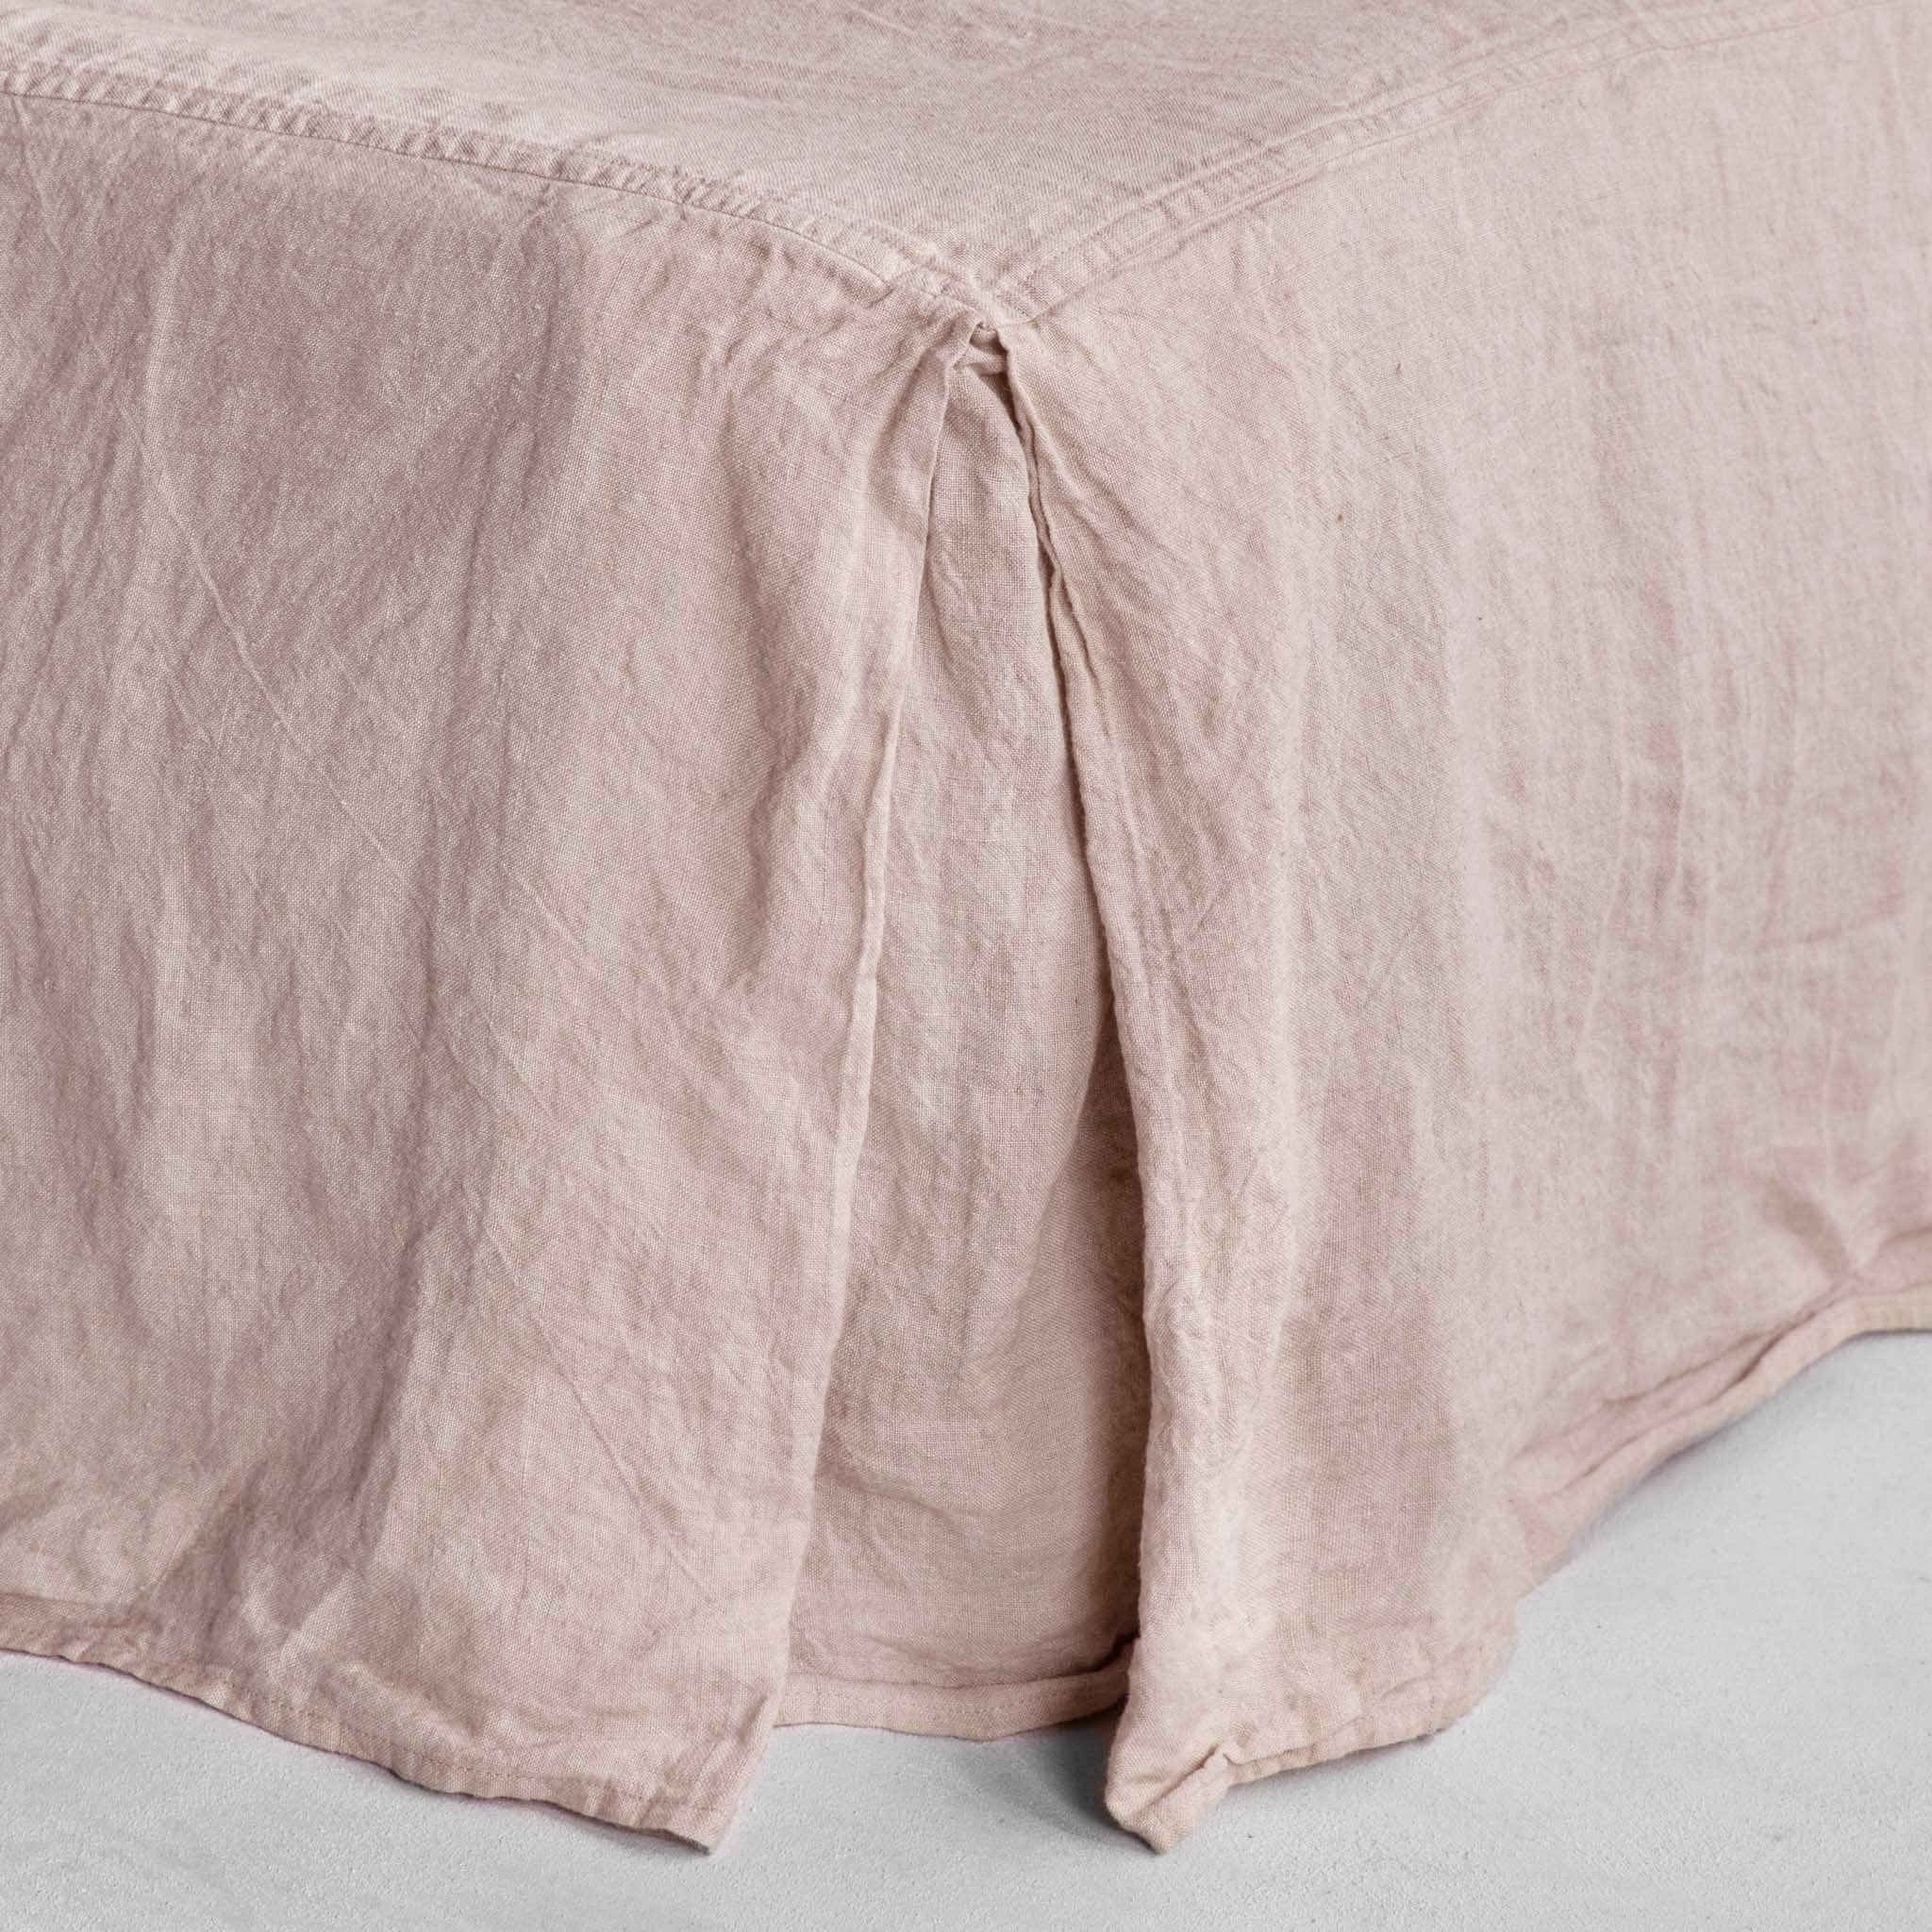 Linen Valance/Bed Skirt | Earthy Pink | Hale Mercantile Co.